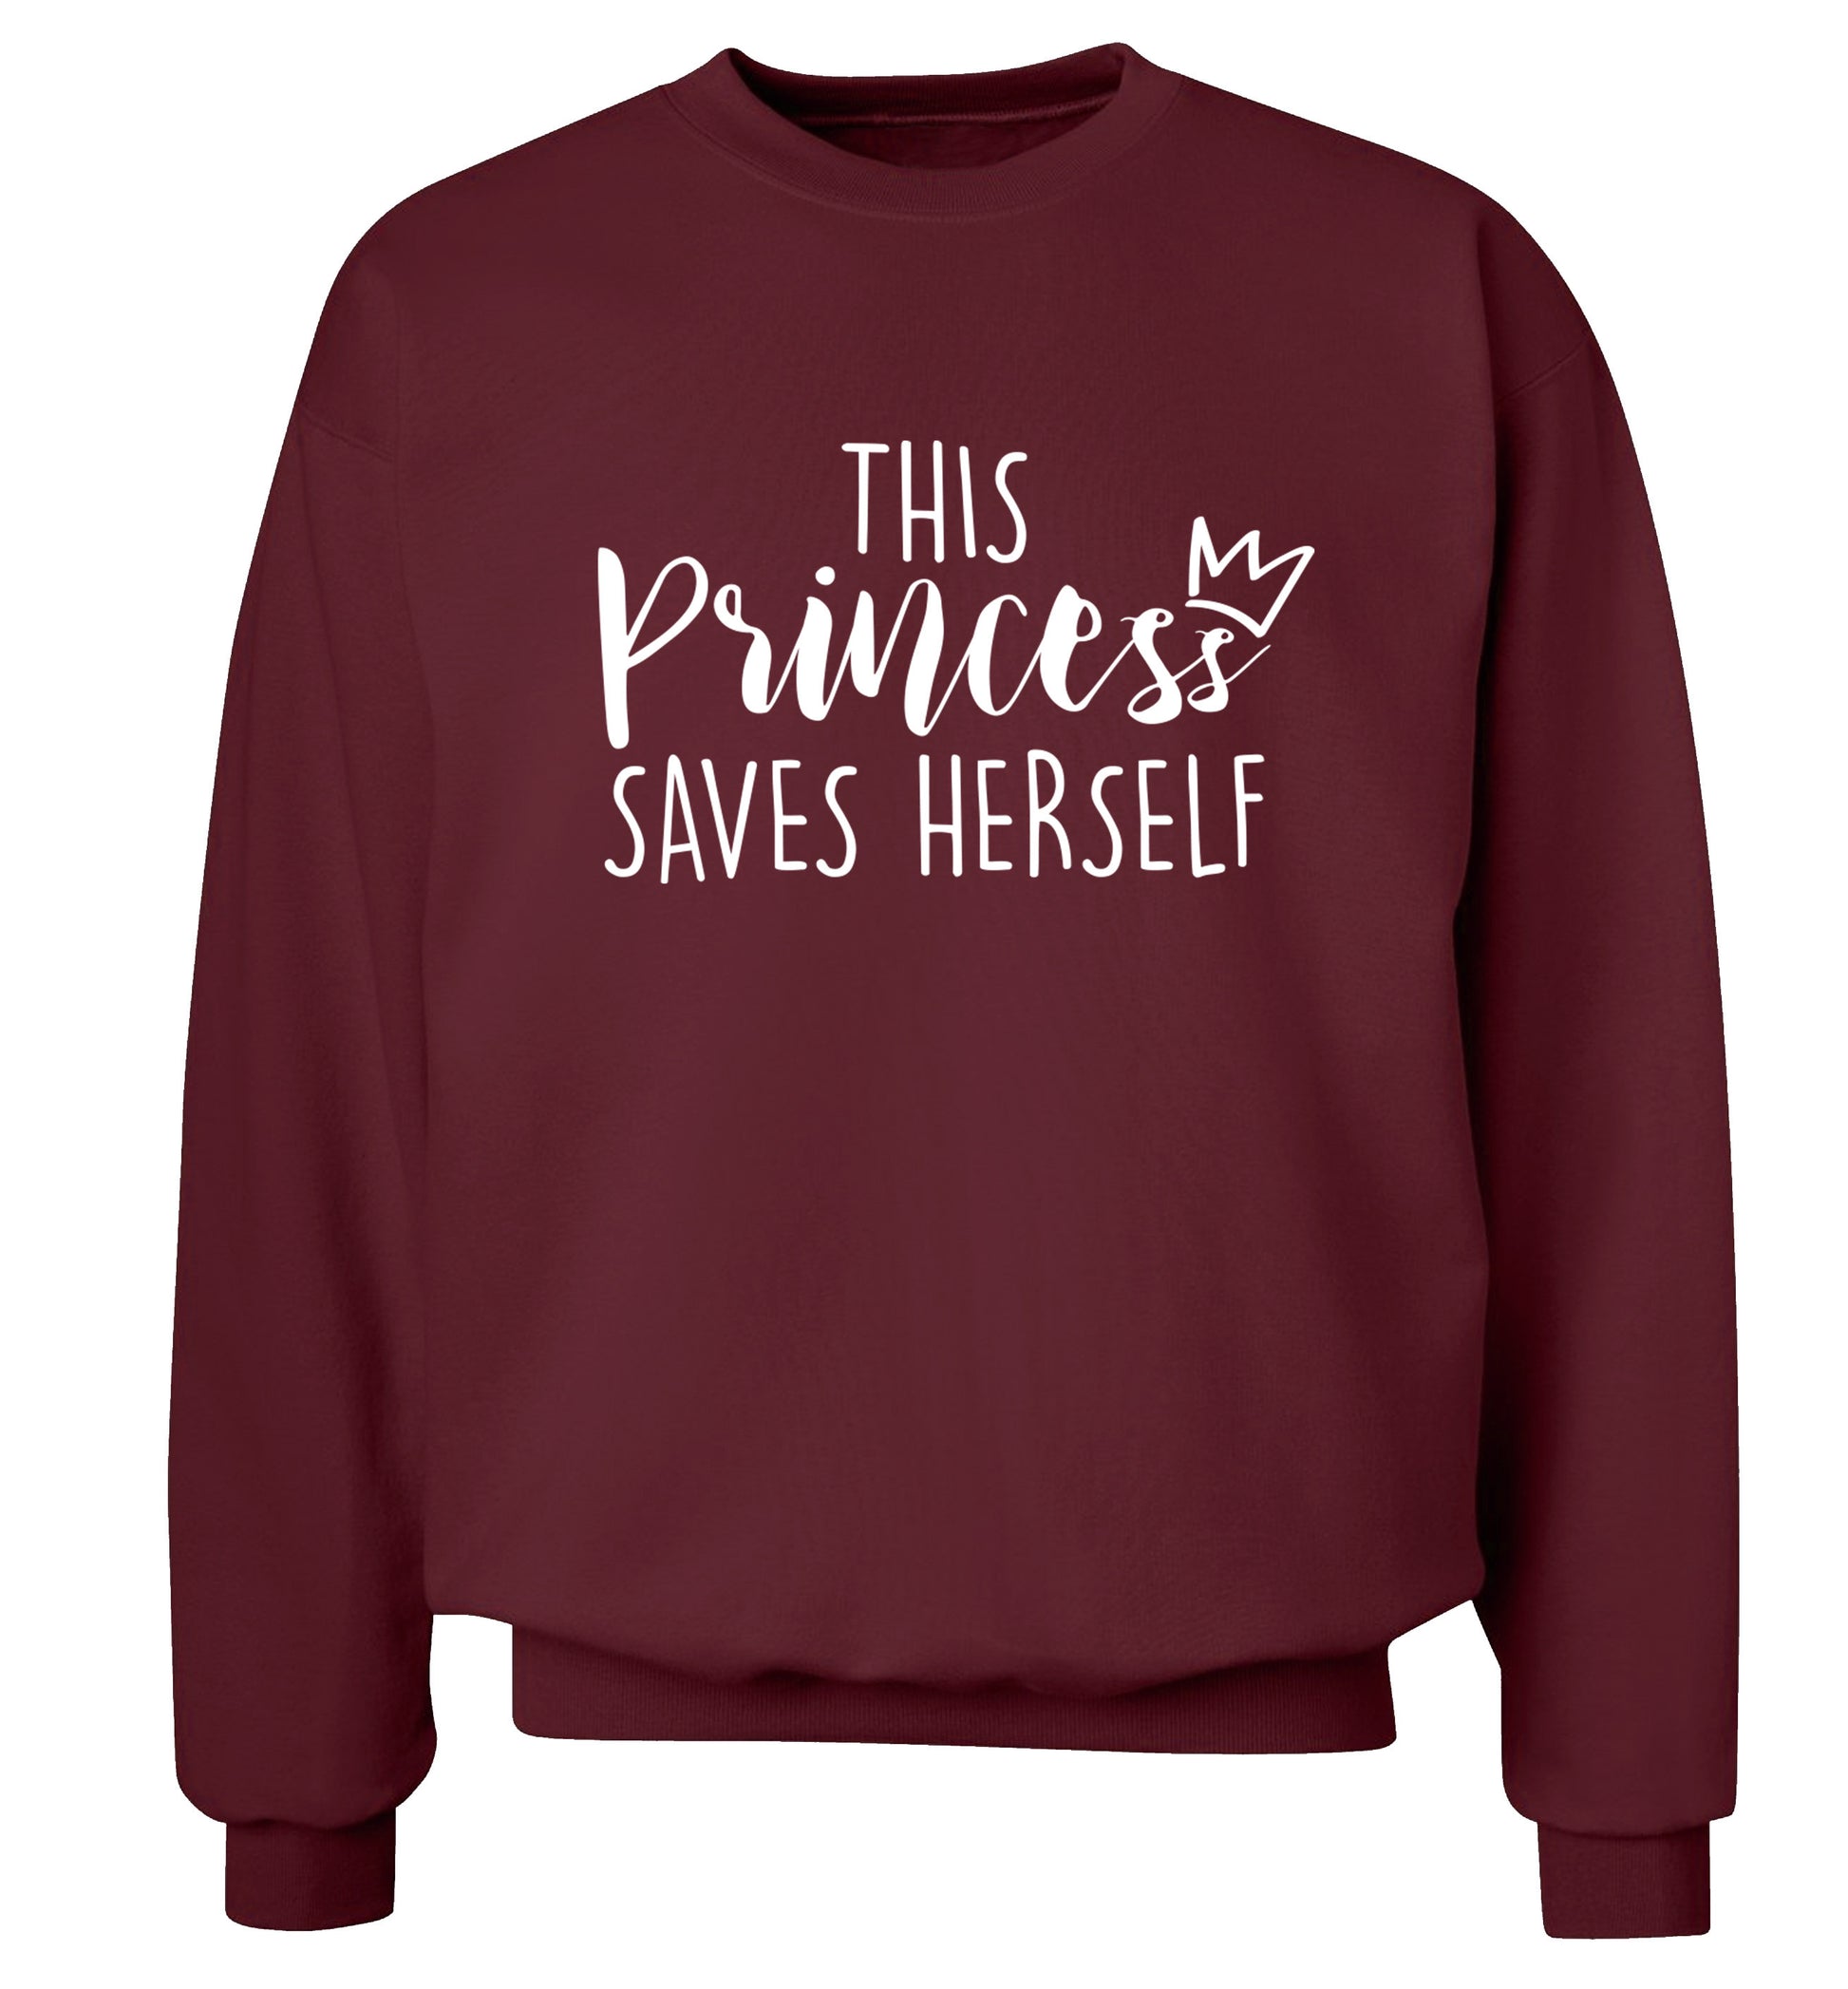 This princess saves herself Adult's unisex maroon Sweater 2XL